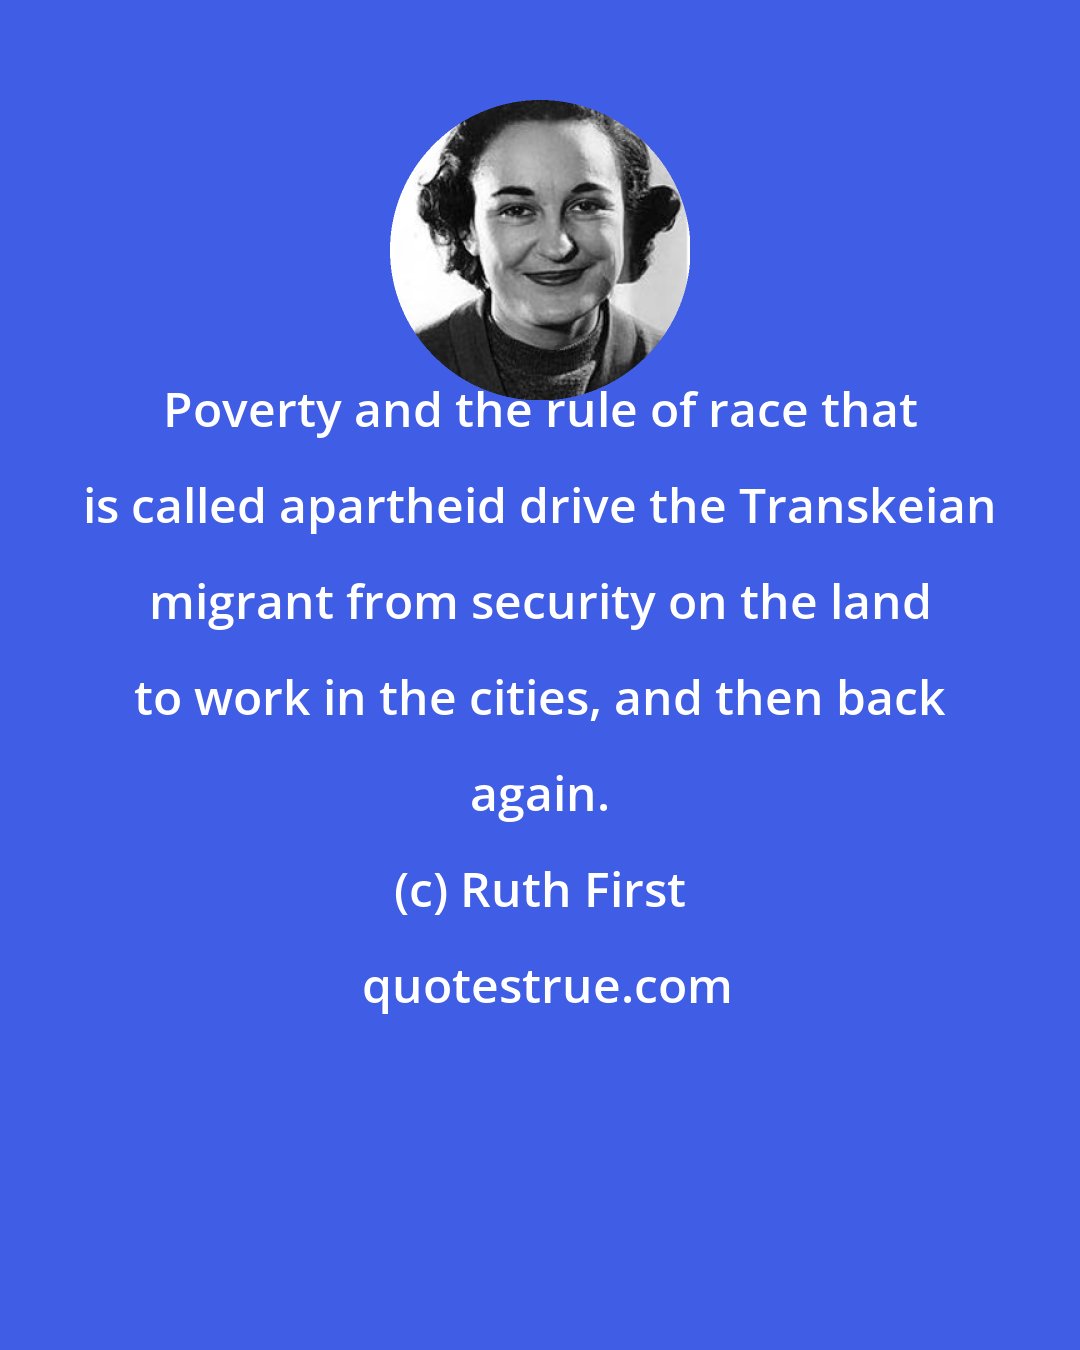 Ruth First: Poverty and the rule of race that is called apartheid drive the Transkeian migrant from security on the land to work in the cities, and then back again.